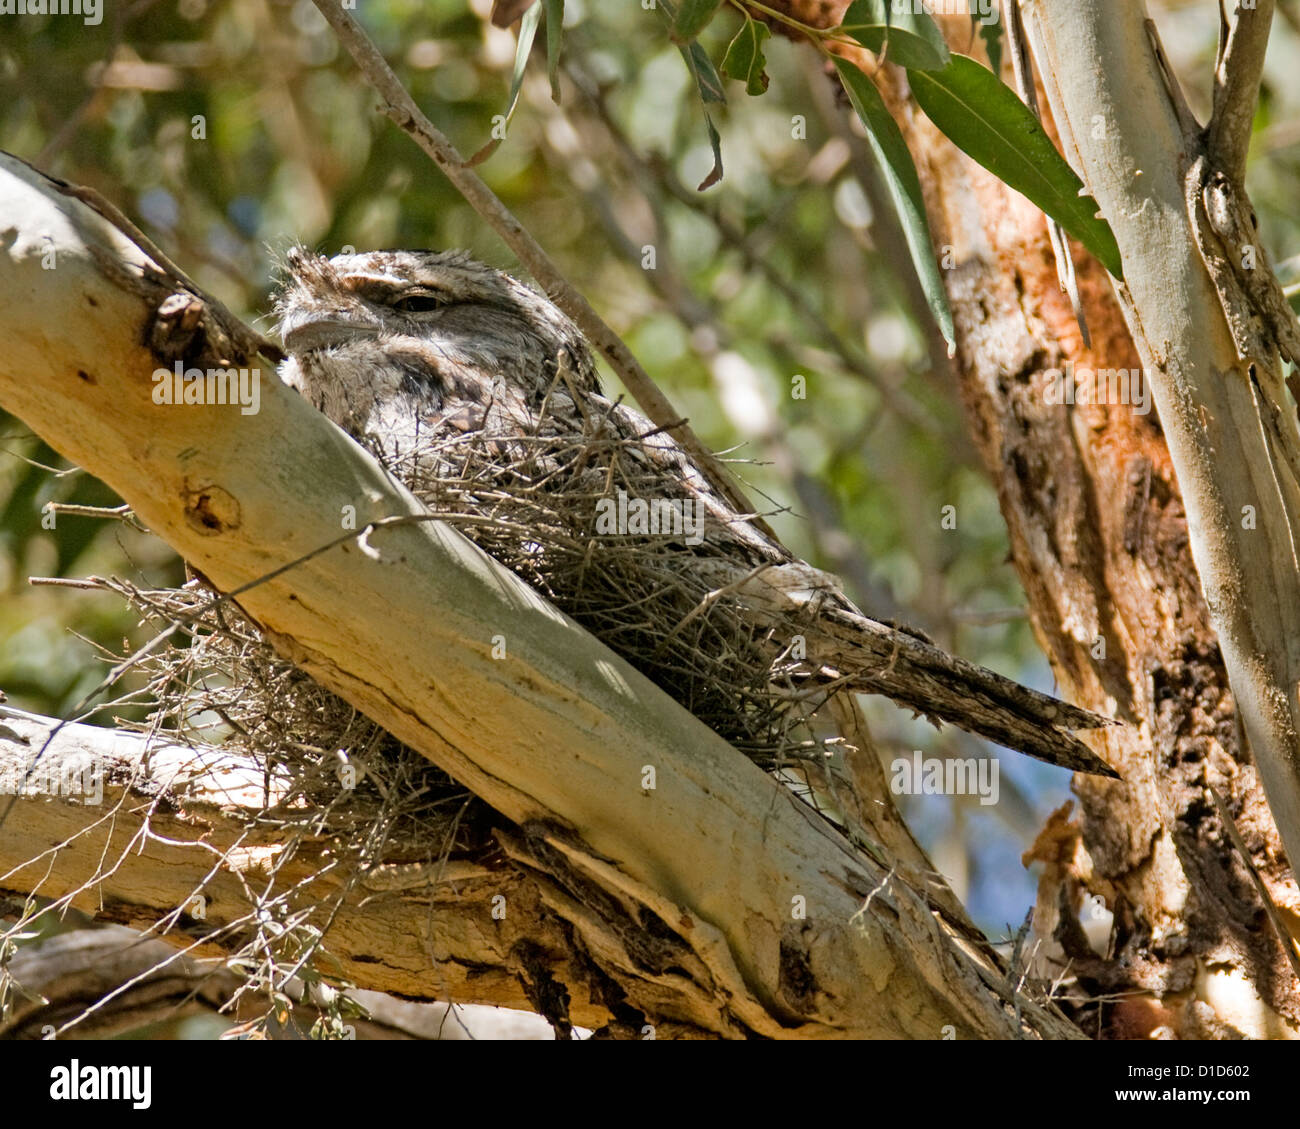 Australian bird, tawny frogmouth, Podargus strigoides, on nest camouflaged among high branches of a native gum tree in coastal woodlands Stock Photo